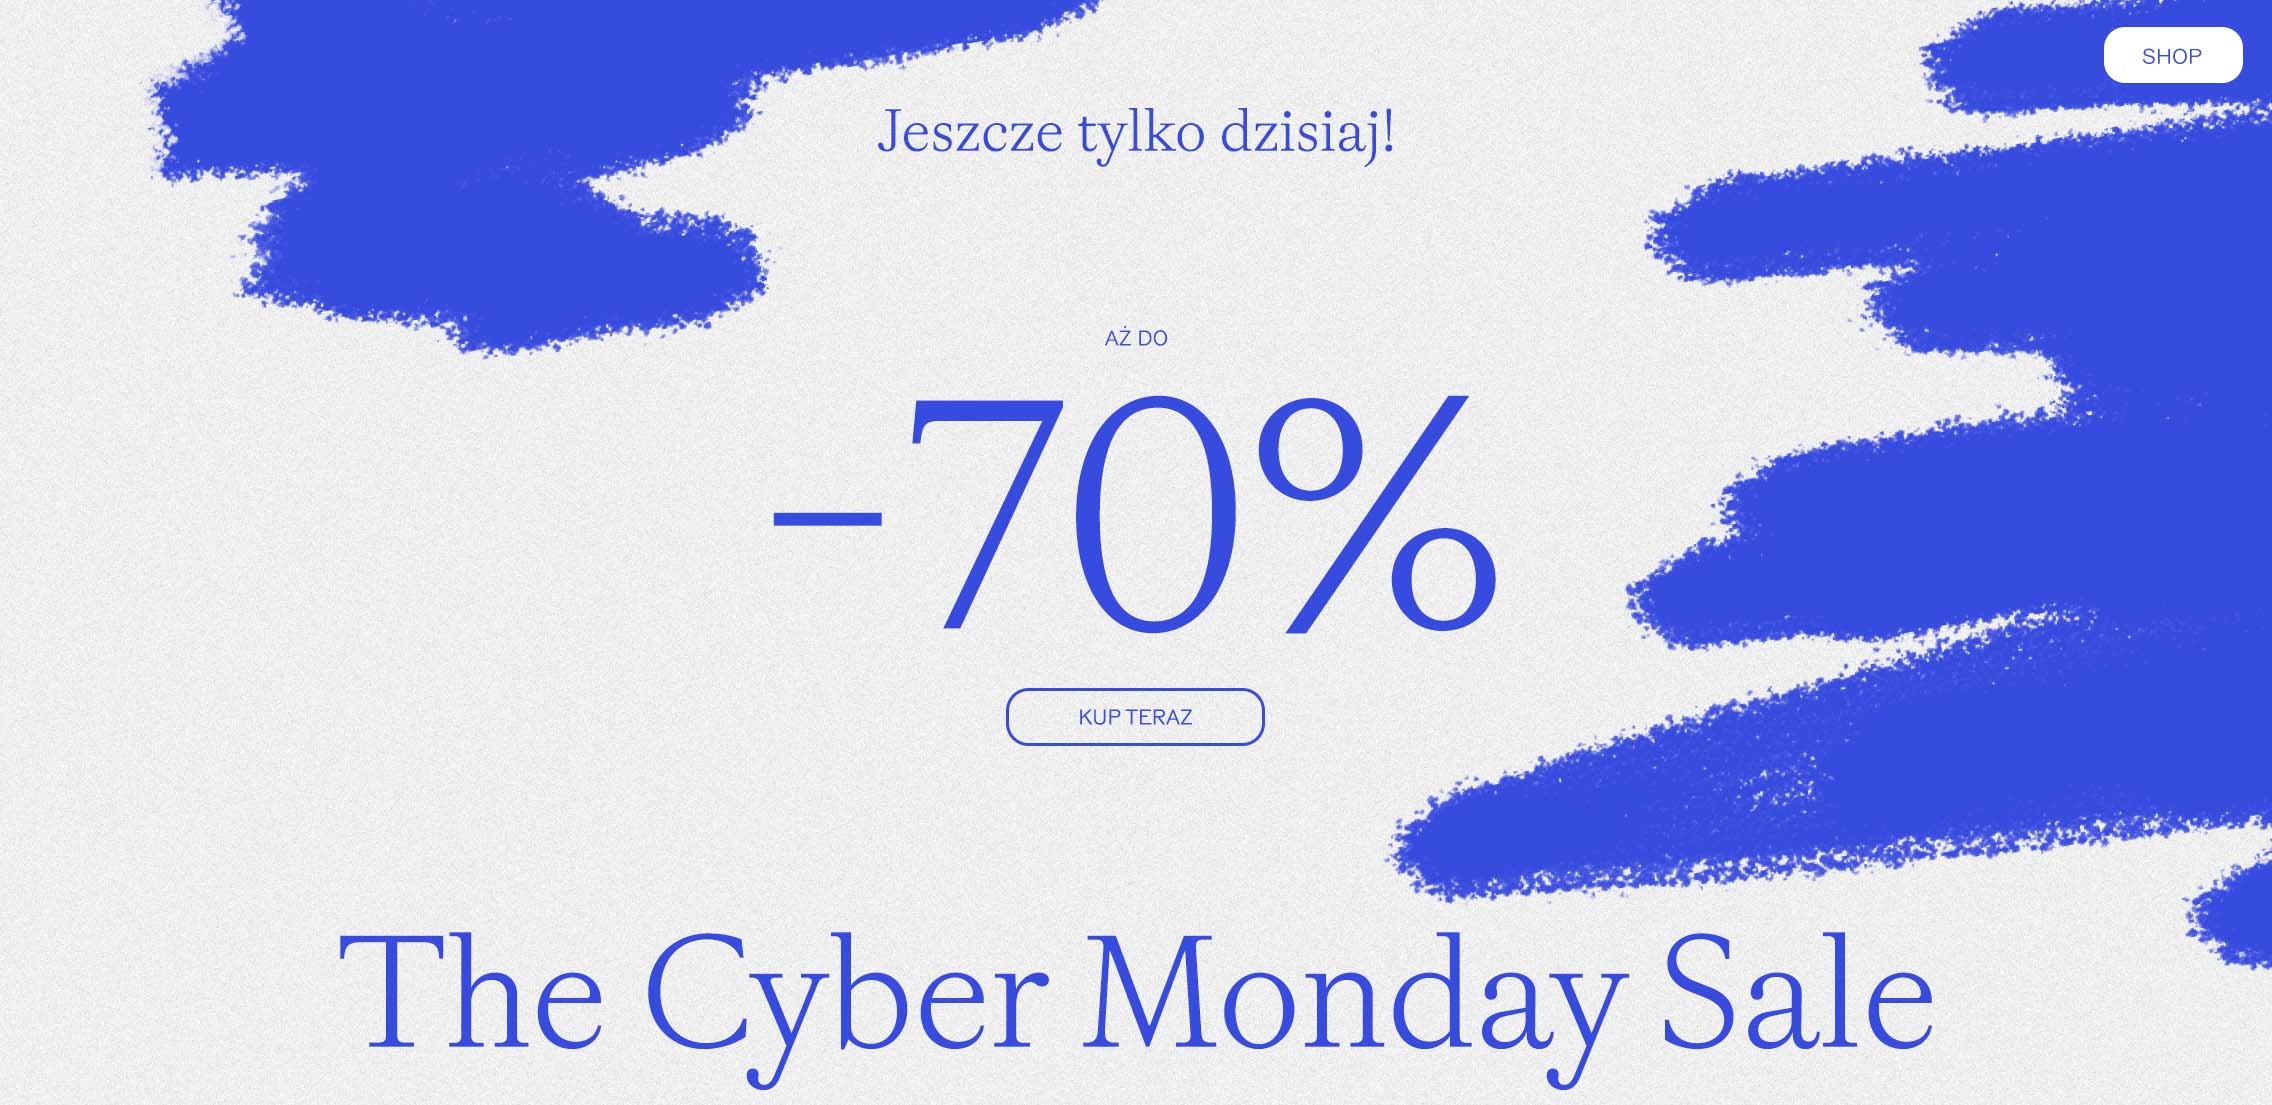 The Cyber Monday Sale